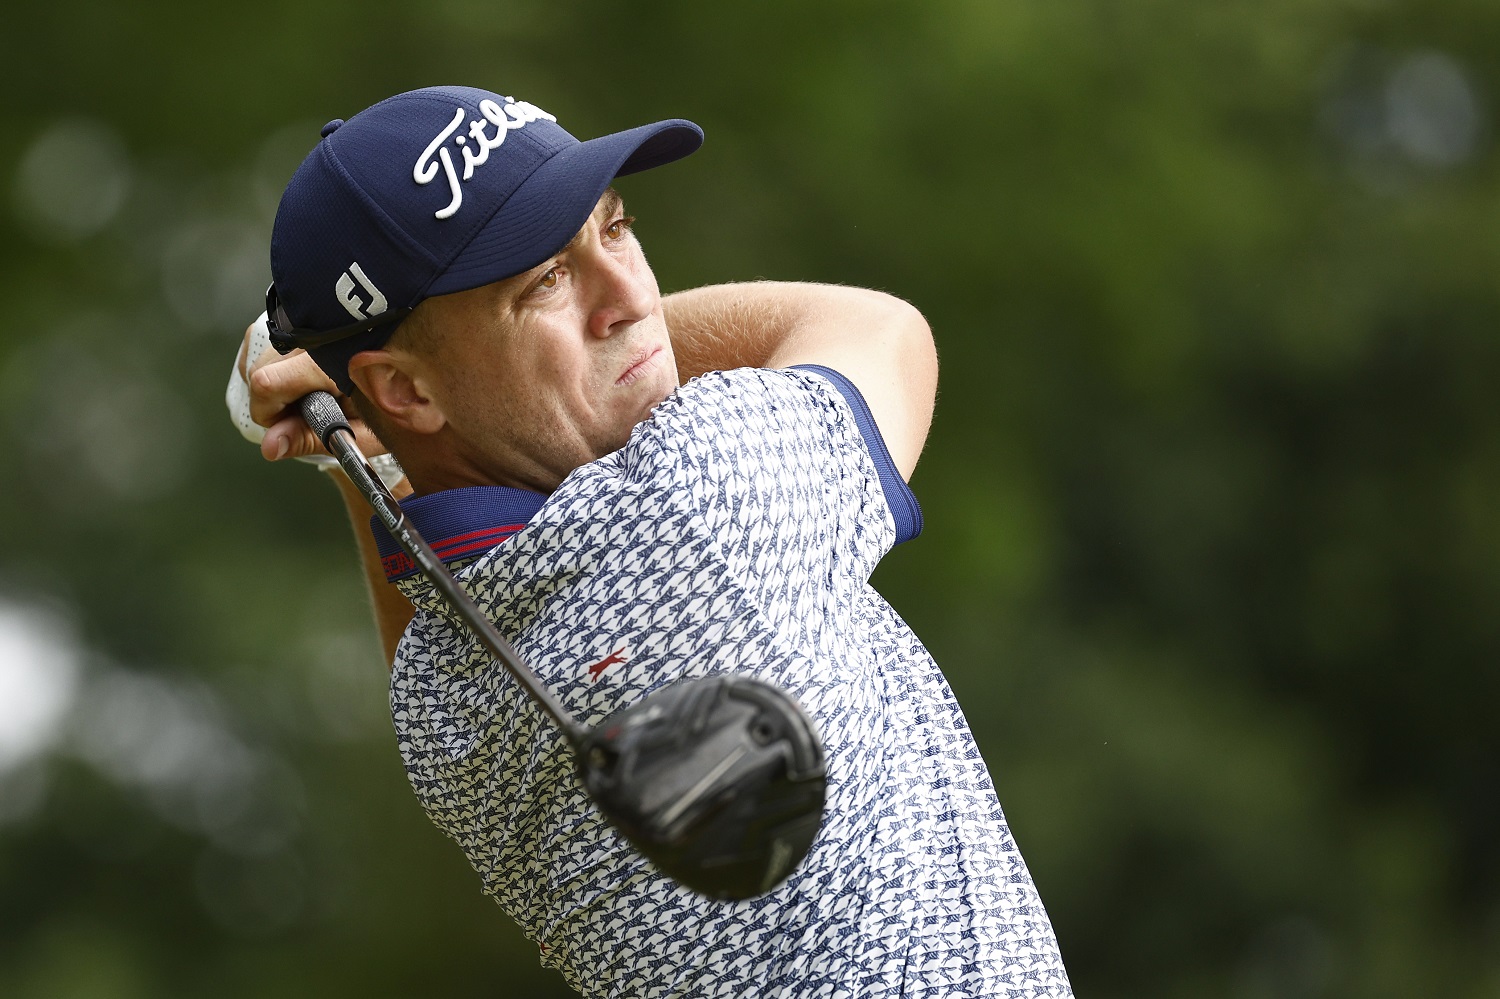 Justin Thomas plays from the 12th tee during the second round of the 122nd U.S. Open at The Country Club on June 17, 2022, in Brookline, Massachusetts. |  Jared C. Tilton/Getty Images